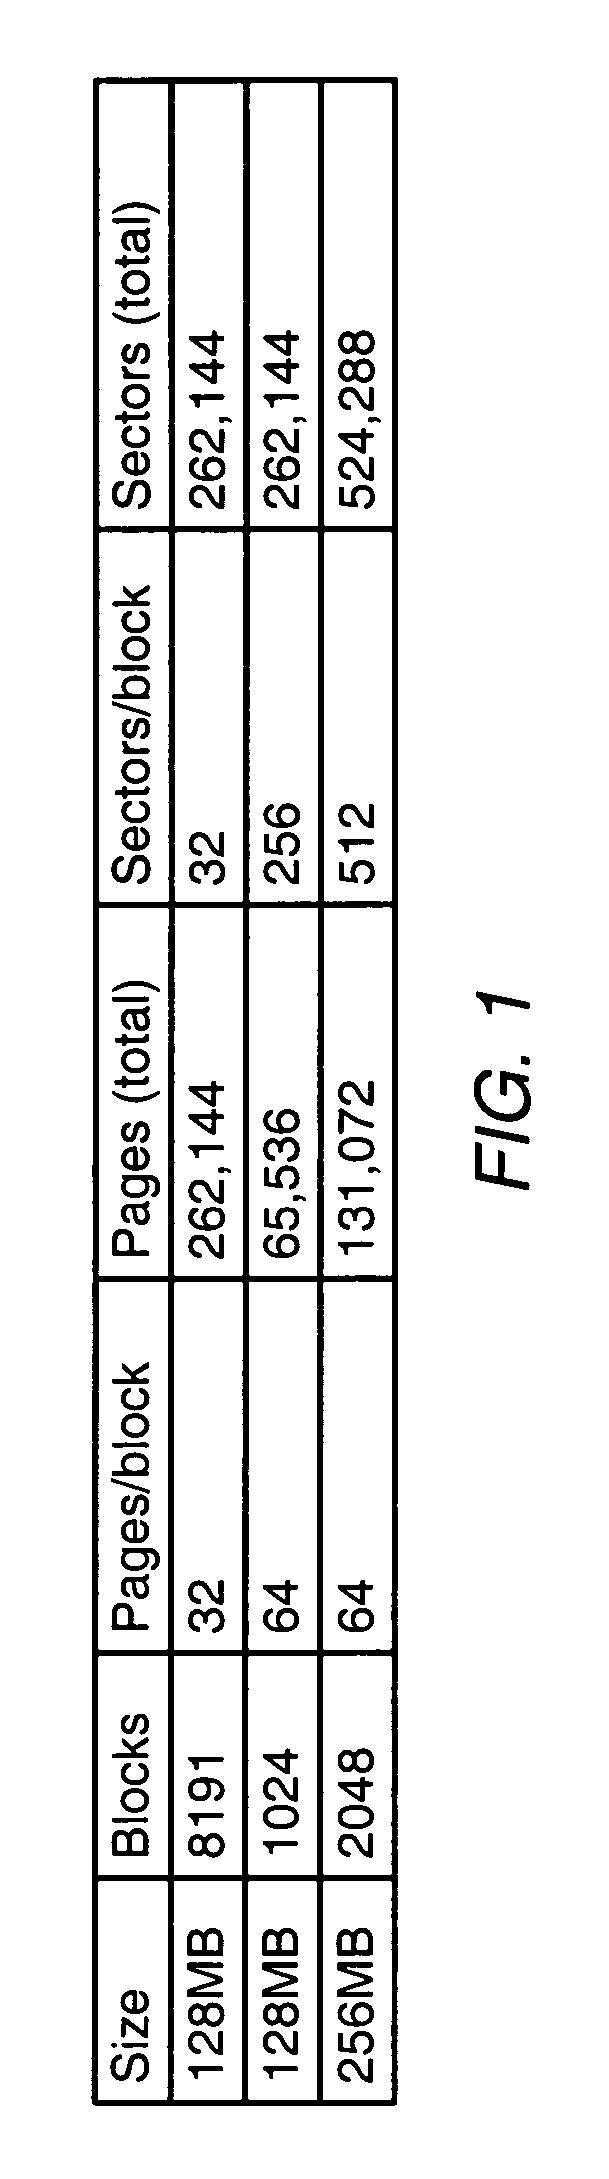 Method for fast access to flash-memory media